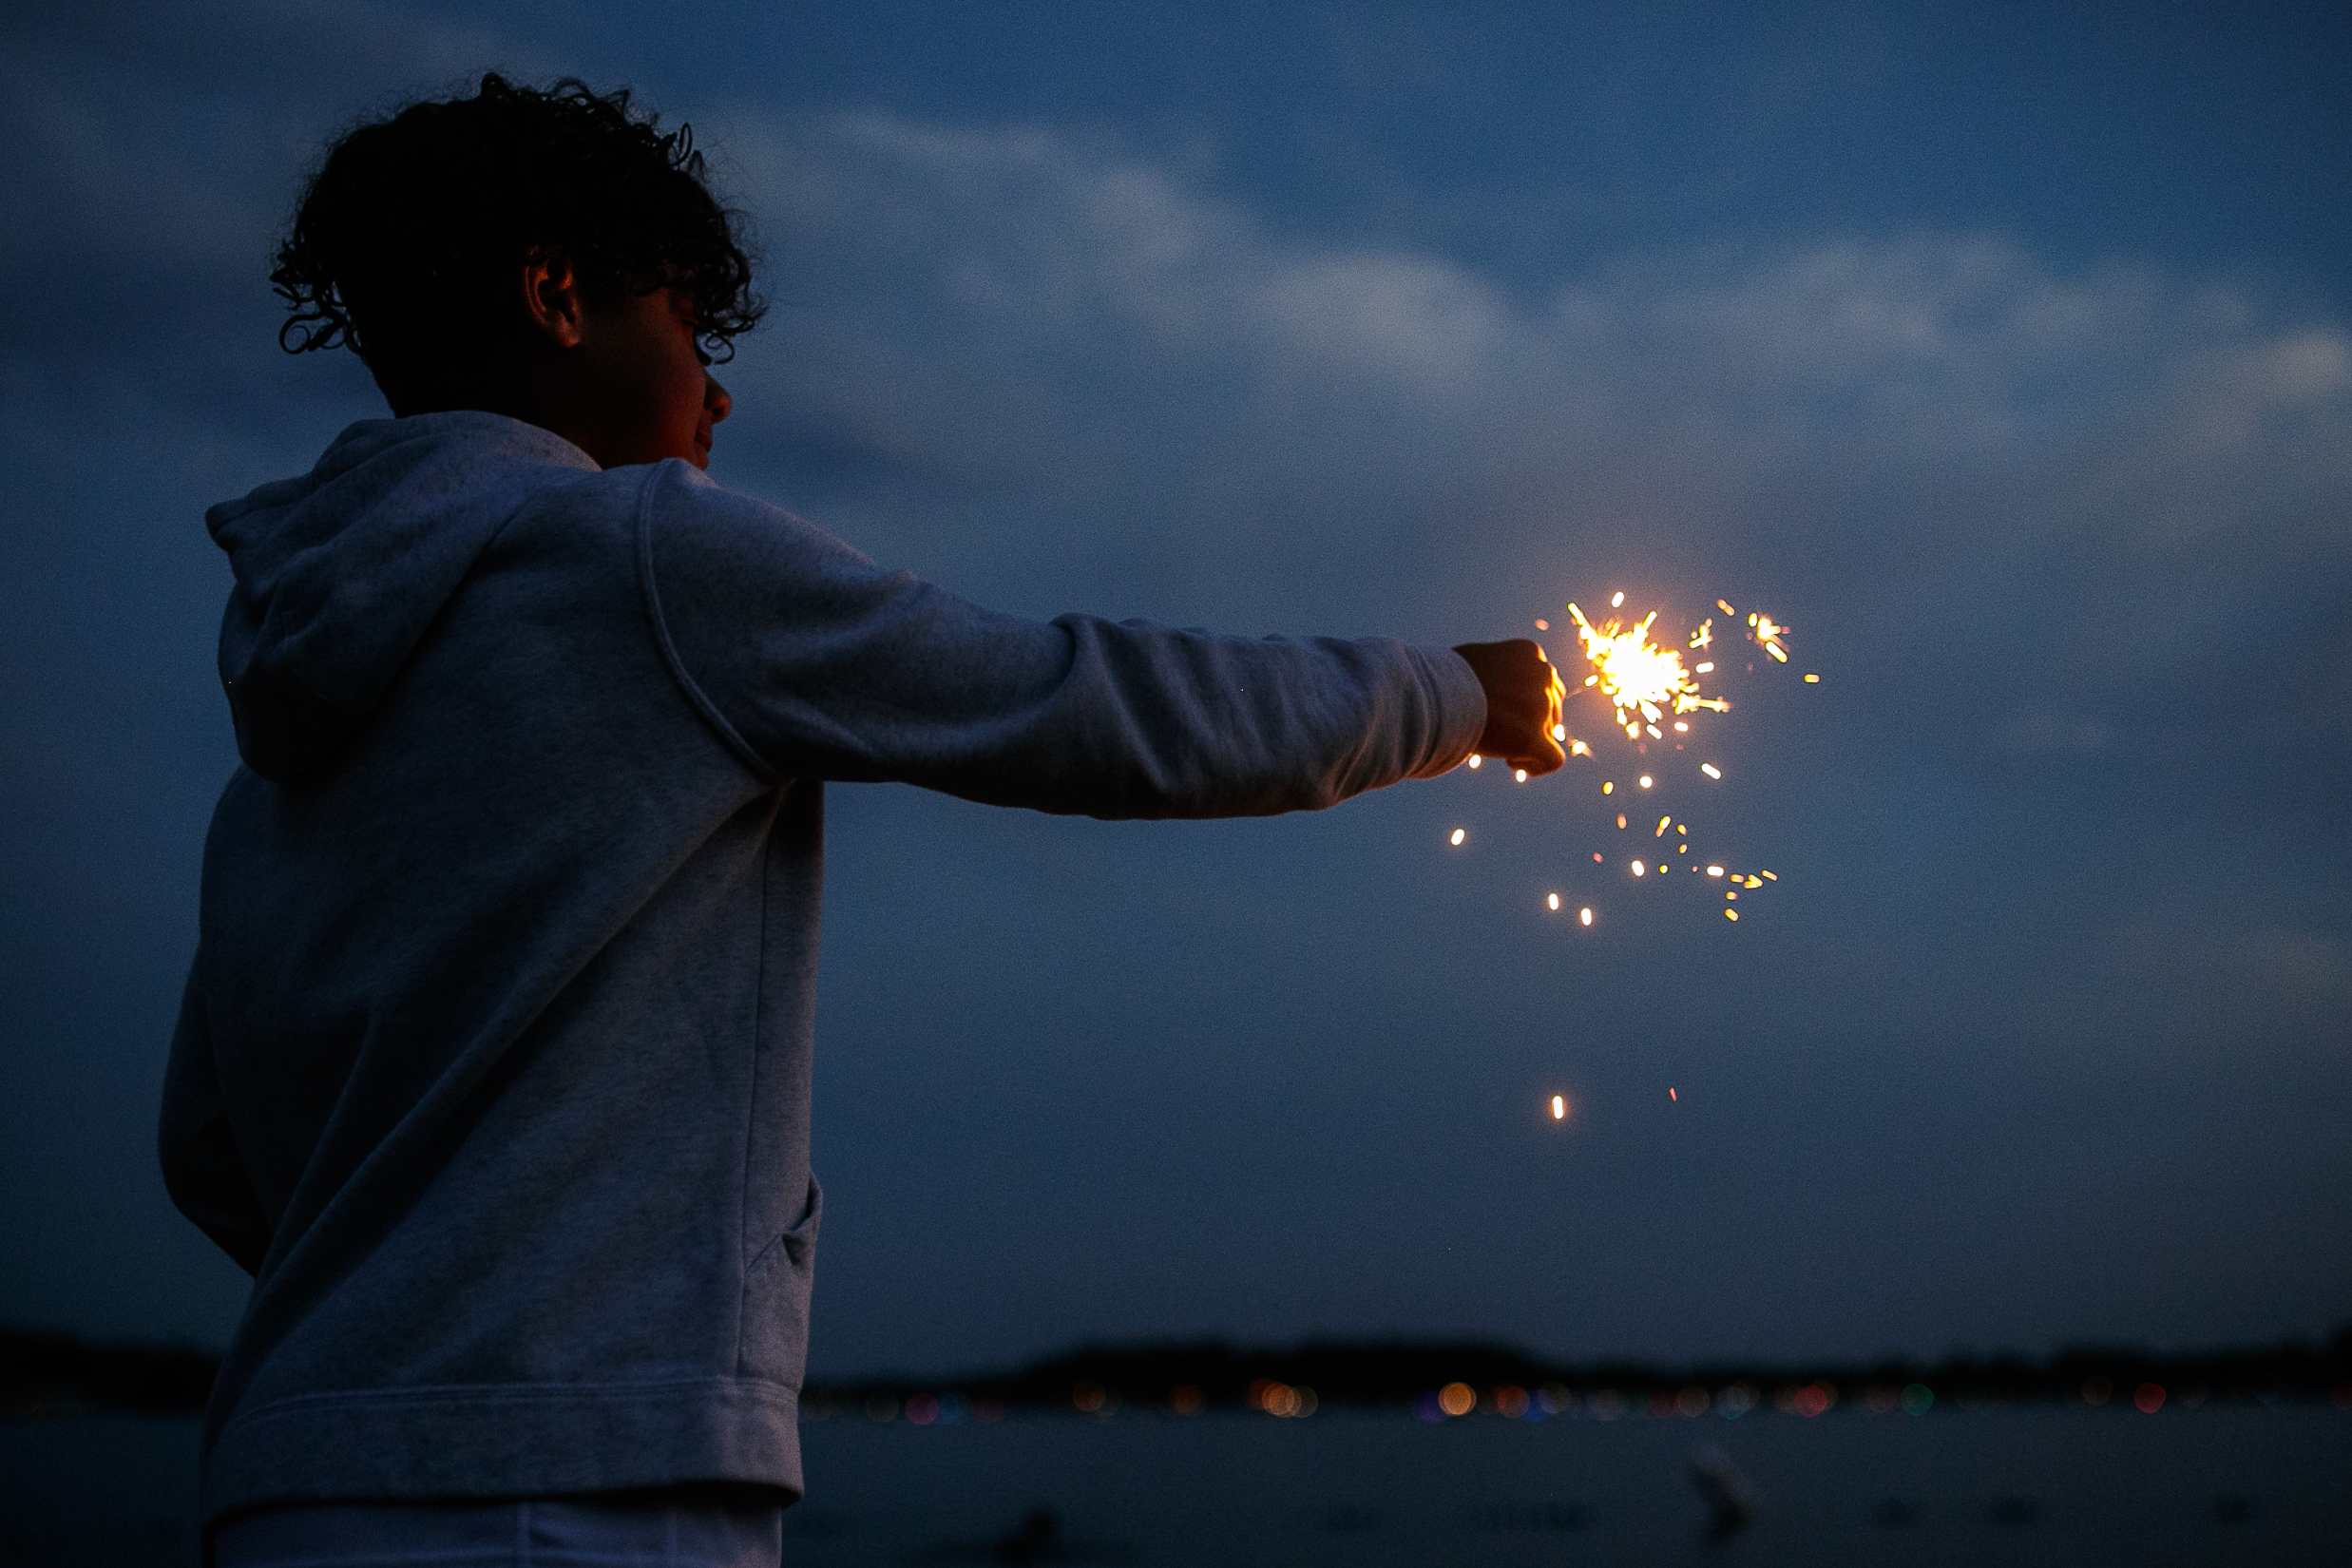 Brodi Jourdan, 10,  plays with a sparkler while waiting for the start of the annual Lake Fenton Fireworks on the water in front of the Township hall on Saturday, June 2, 2022 in Fenton Township. (Jenifer Veloso | MLive.com)

